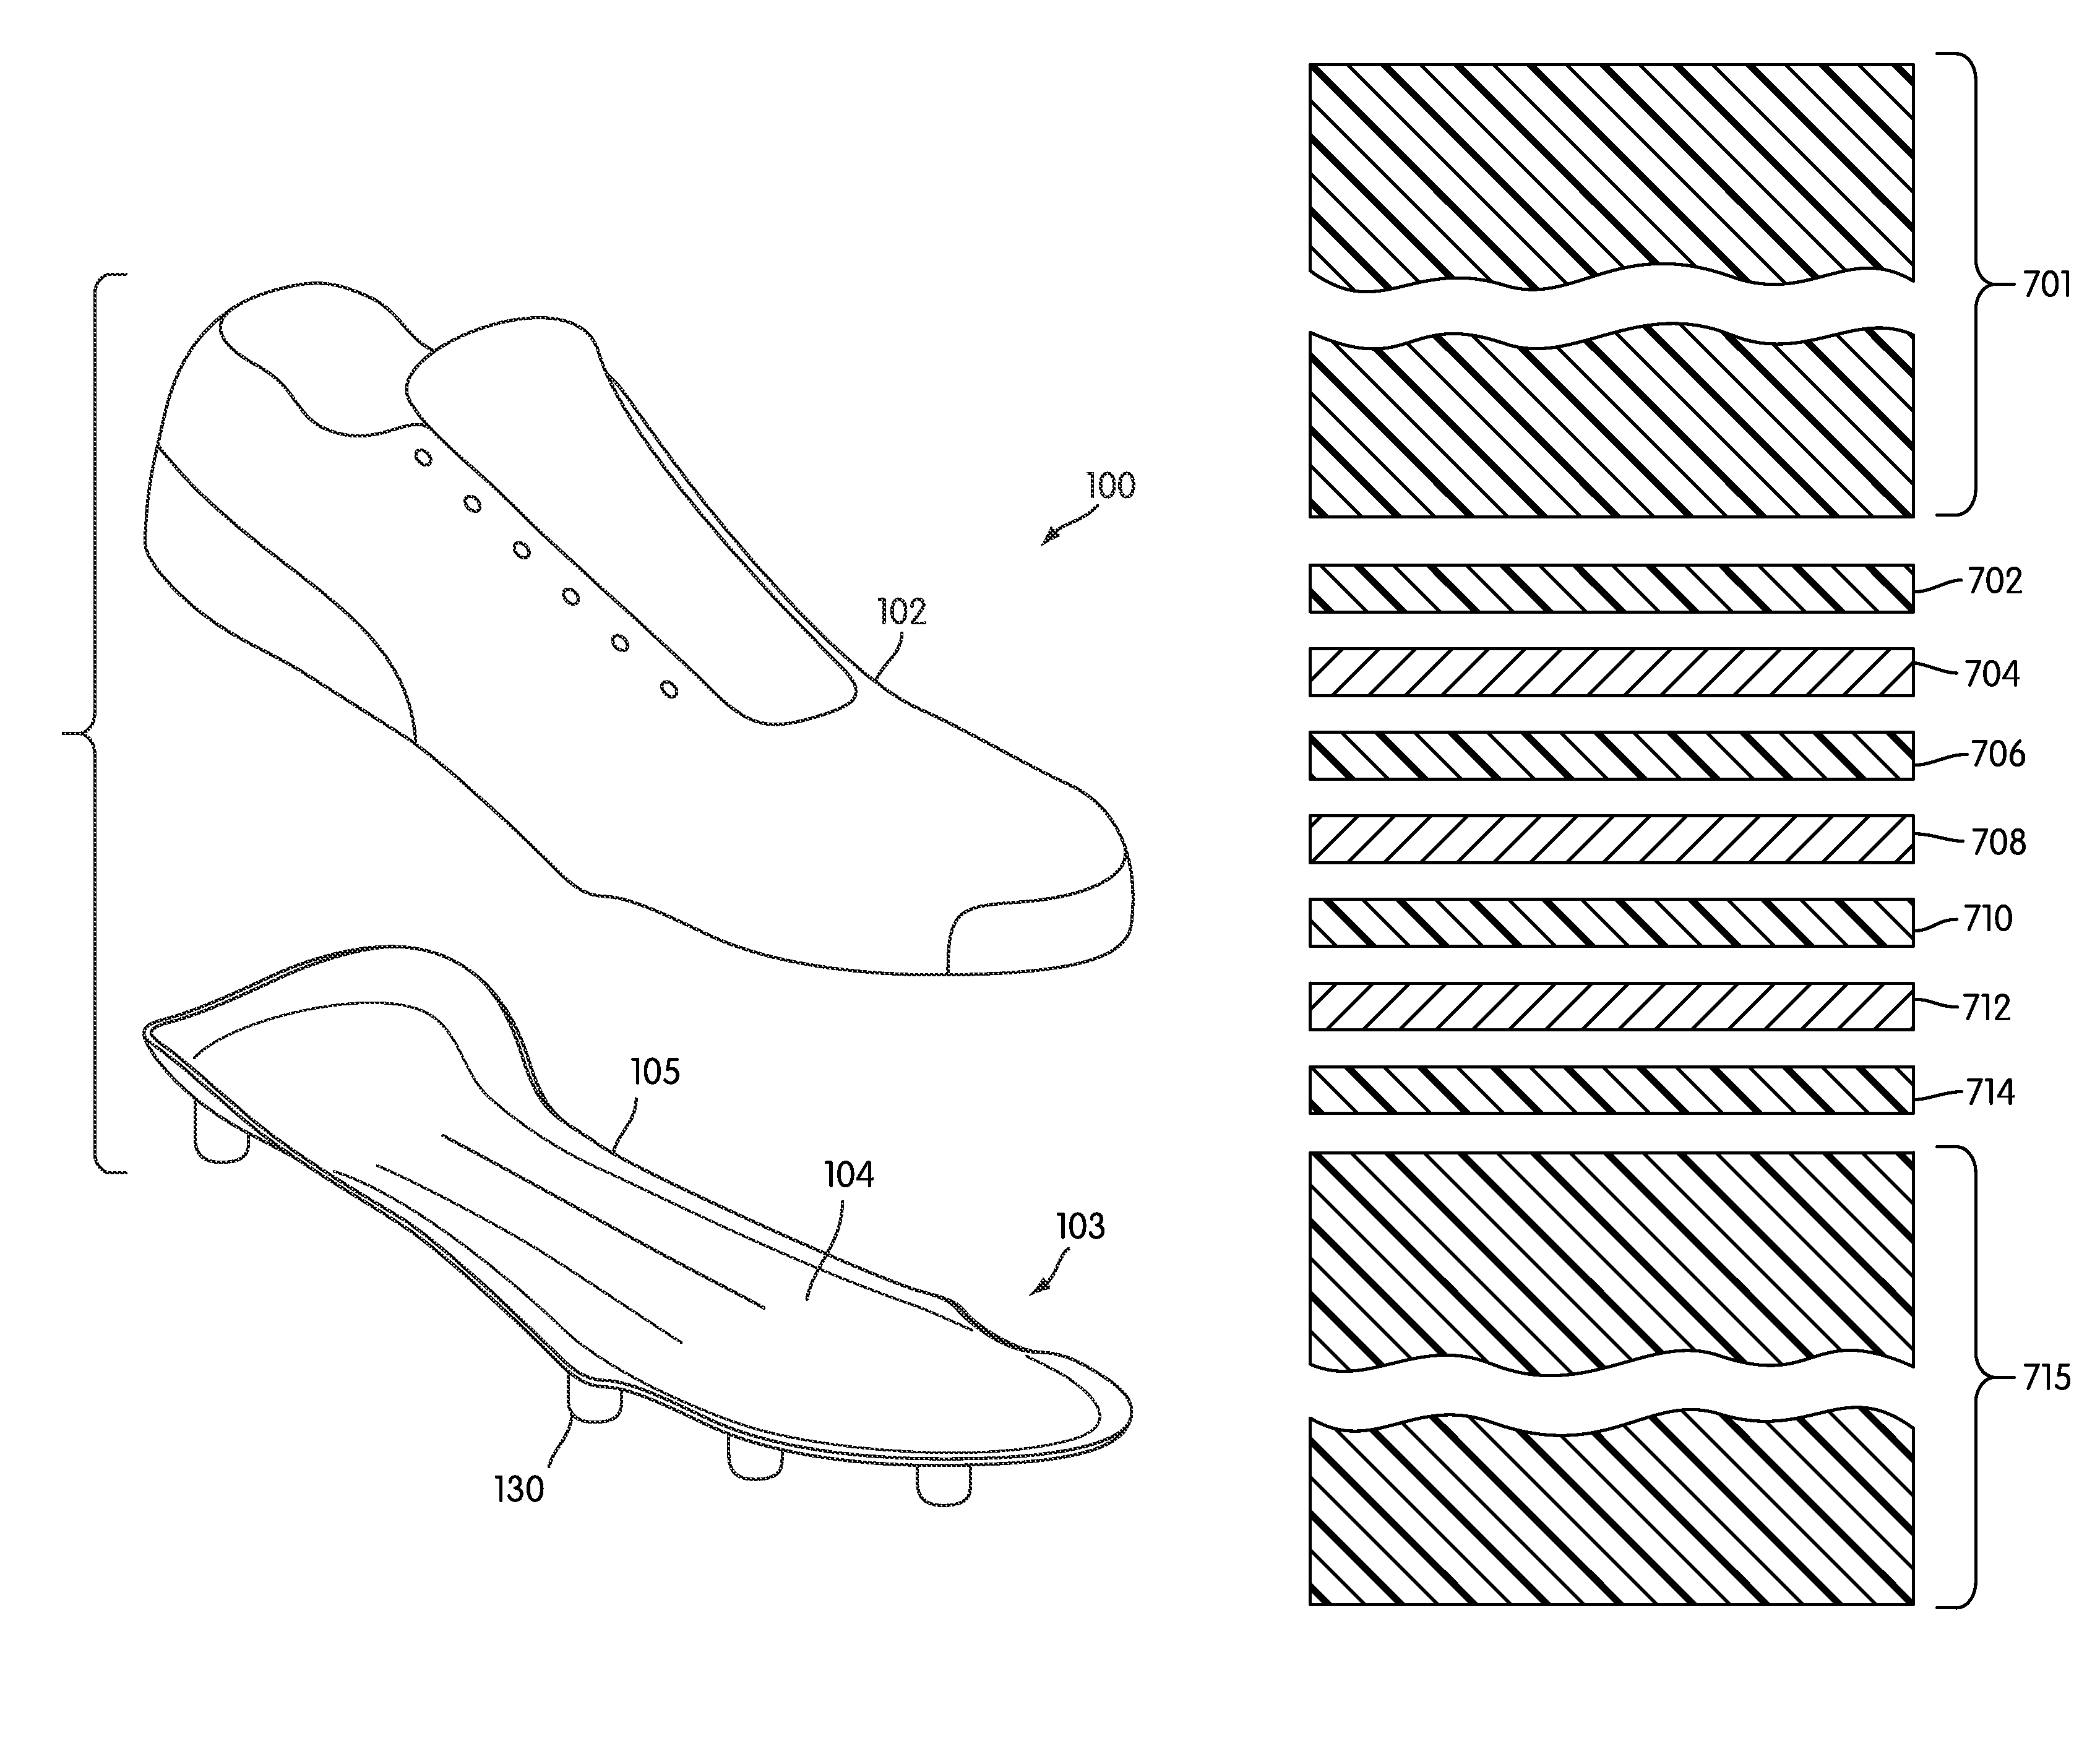 Article of footwear including full length composite plate